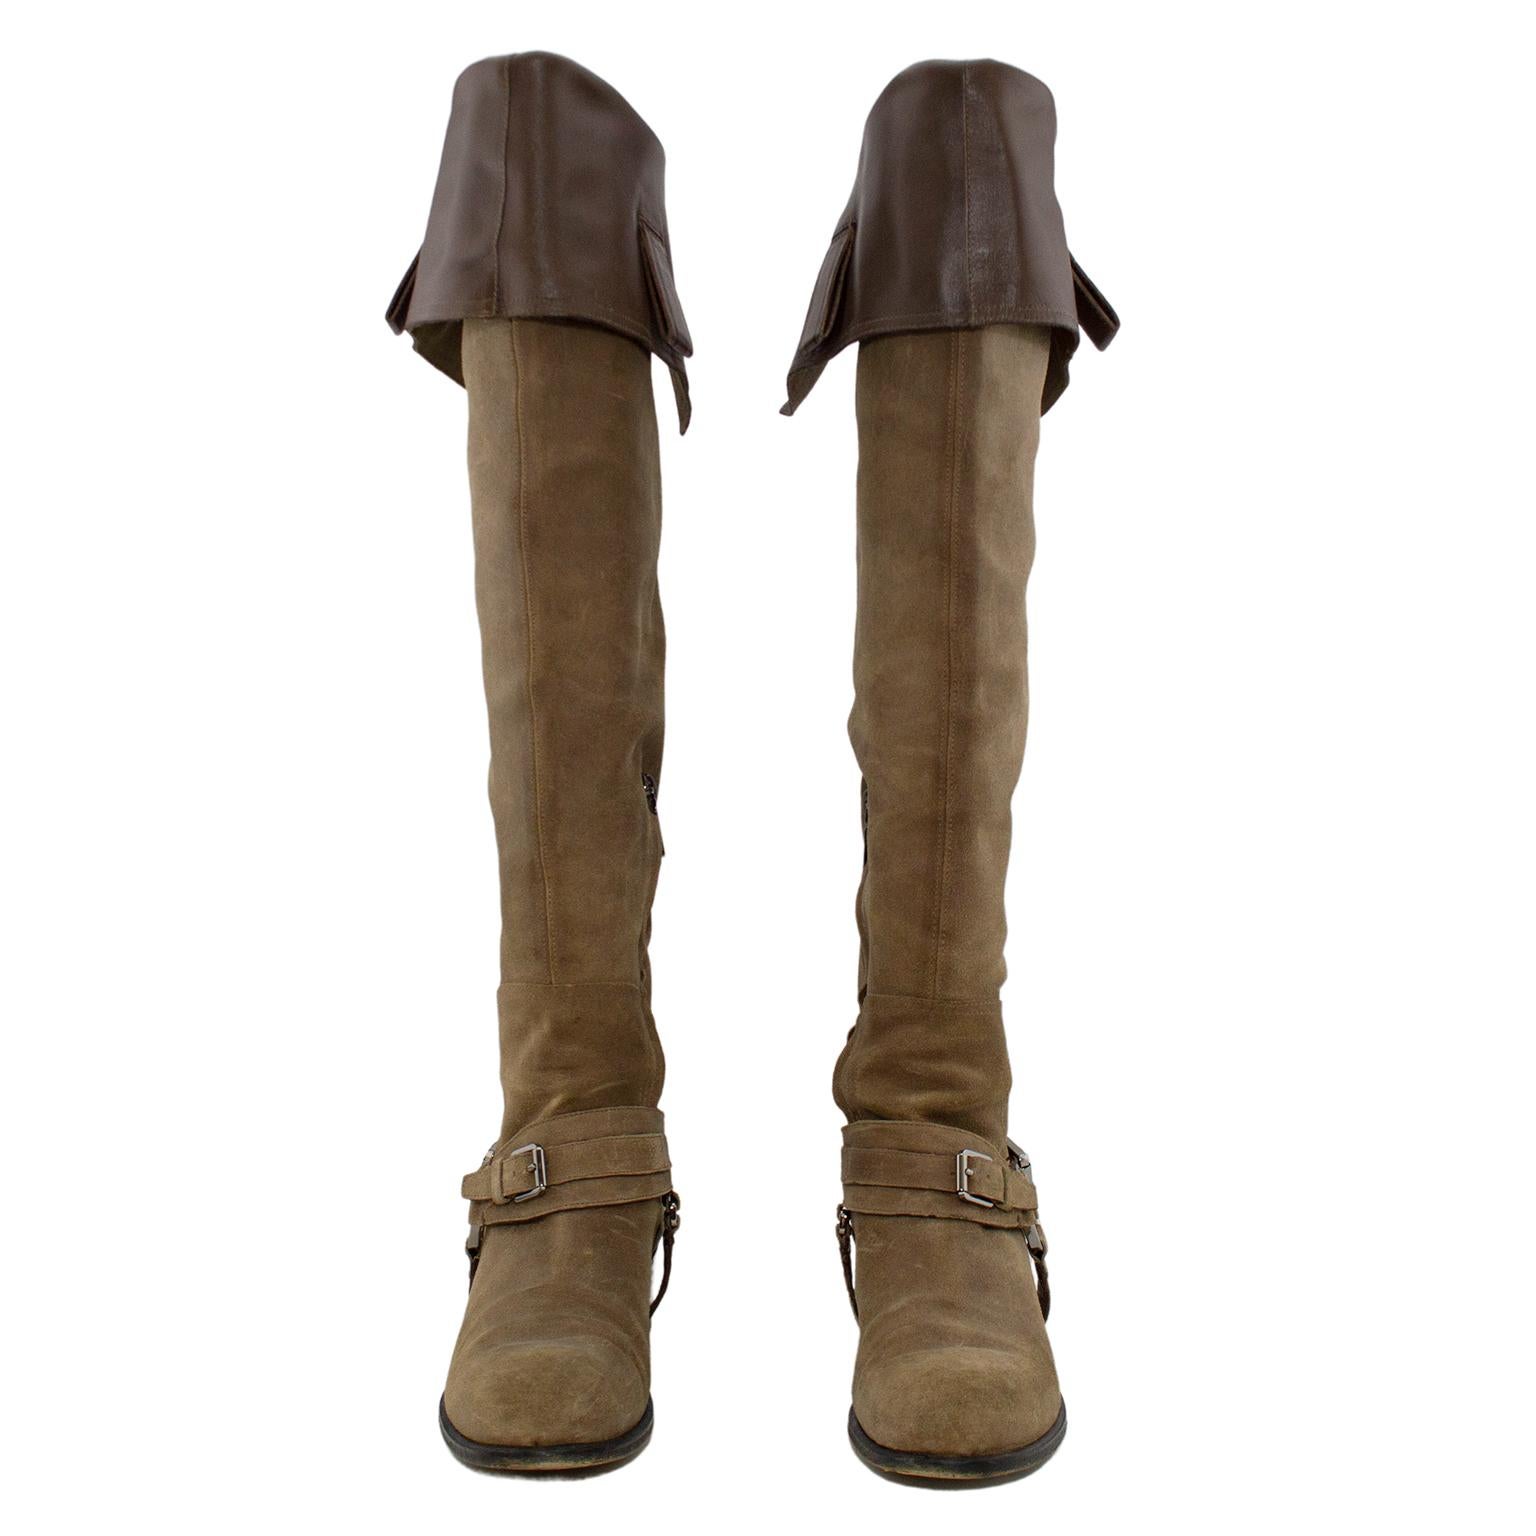 Chic taupe suede Dior over-the-knee buccaneer boots in excellent condition. Block heel on a heavy sole, wrap around straps and concealed inside zip closure, silver metal tone buckle and circular CD branded link. Heel 1.5